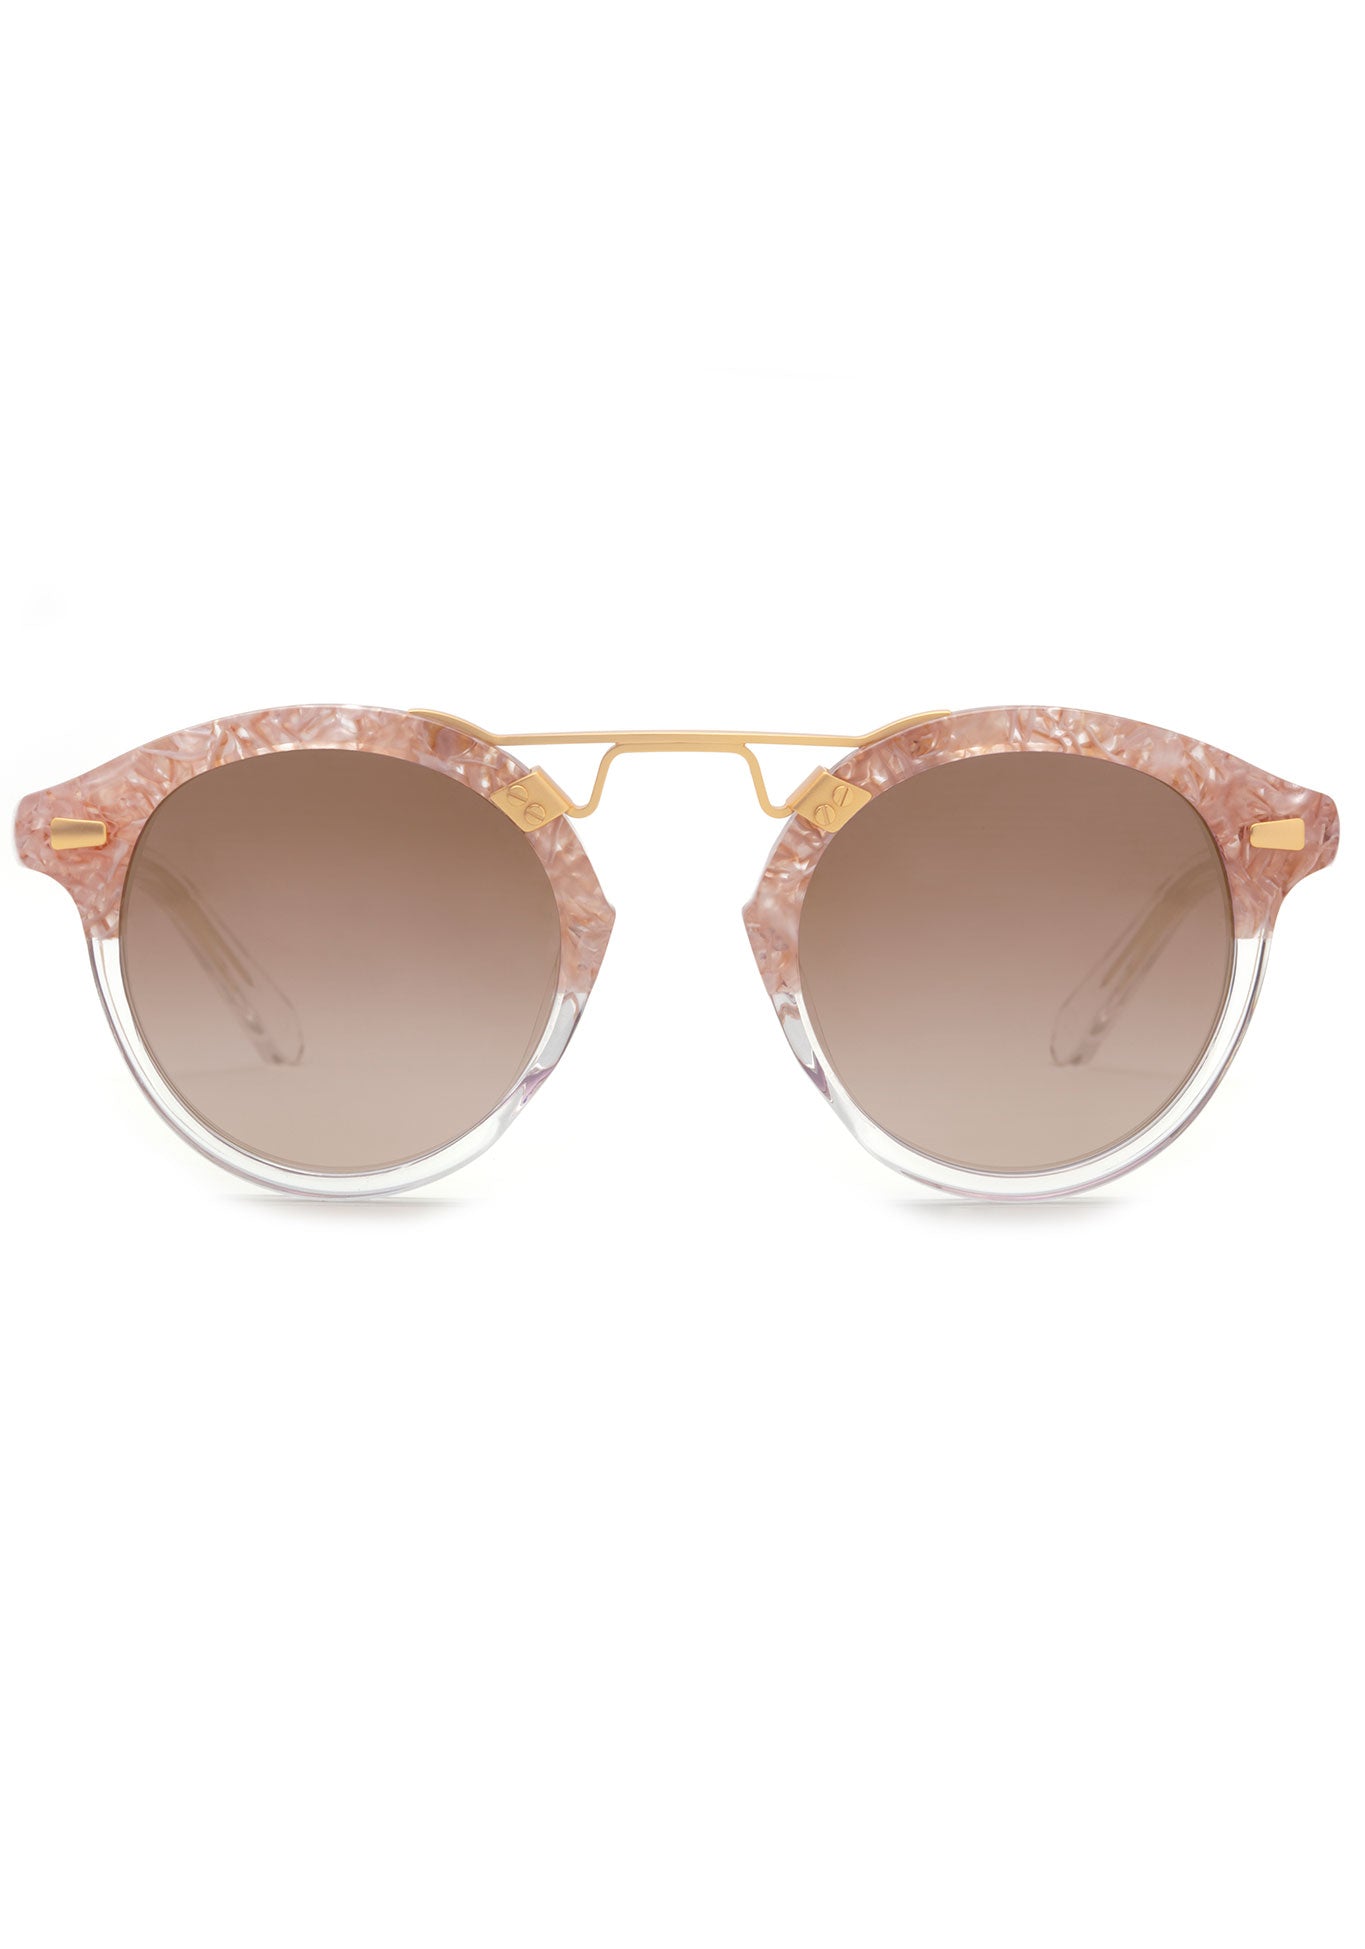 STL II | Camellia to Crystal Mirrored 24K Handcrafted, pink and clear split acetate KREWE sunglasses